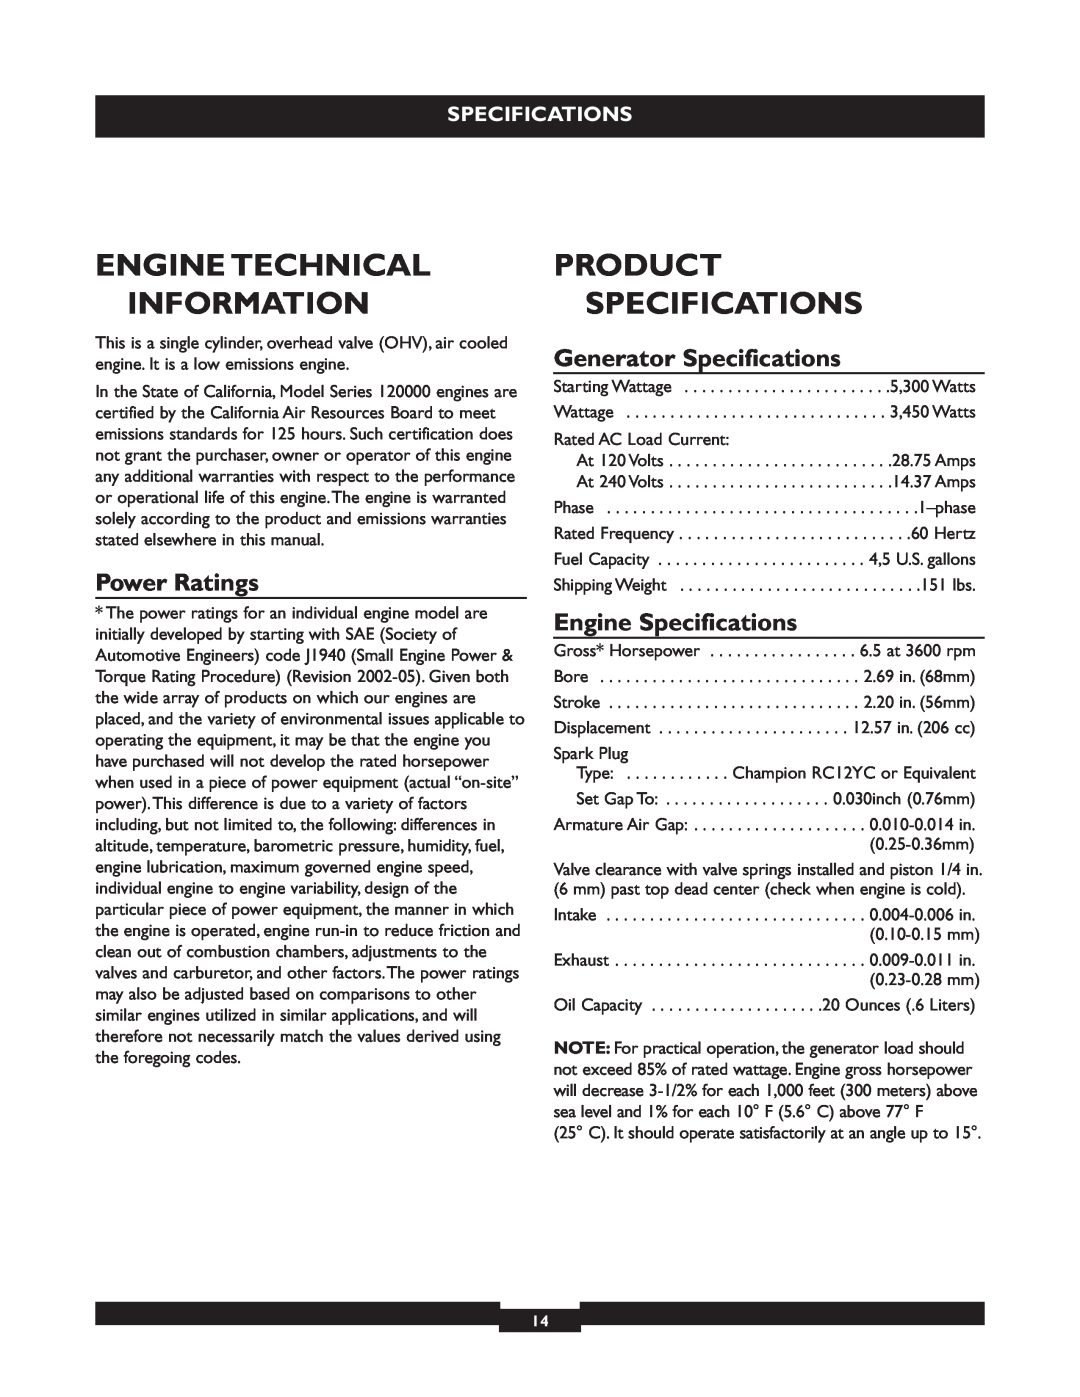 Briggs & Stratton 30236 Engine Technical Information, Product Specifications, Power Ratings, Generator Specifications 